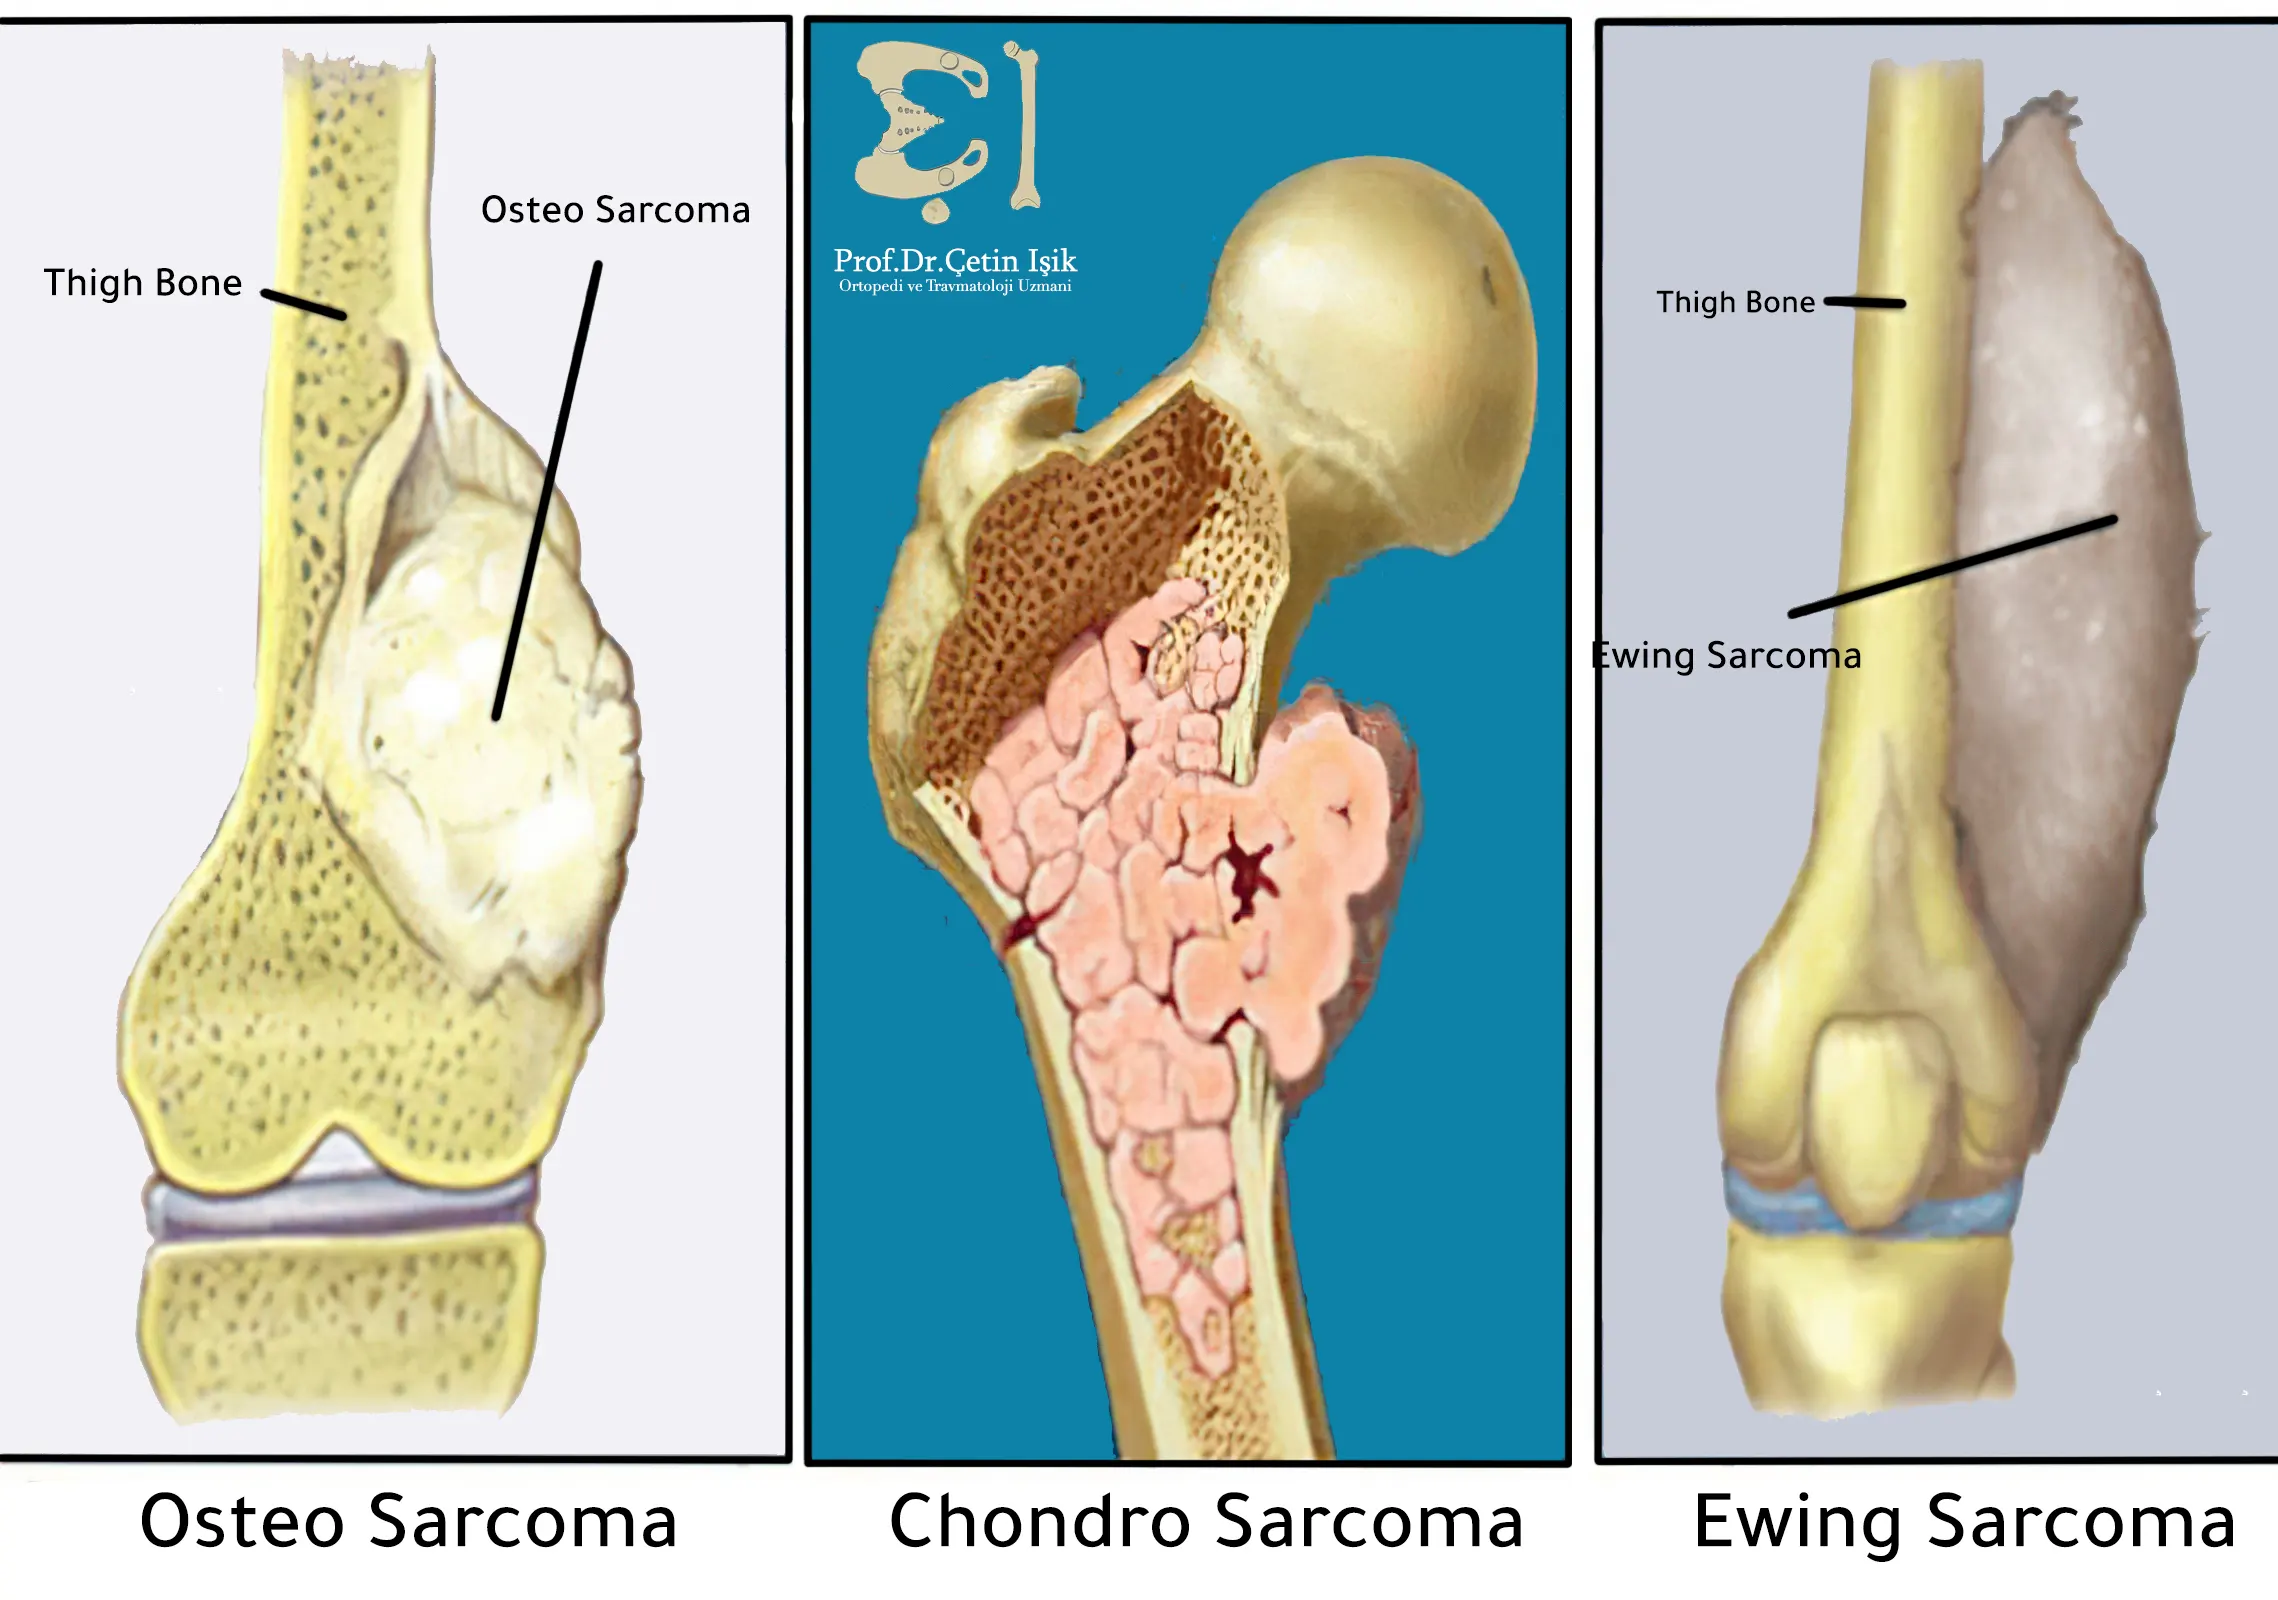 An image showing the primary types of bone cancer